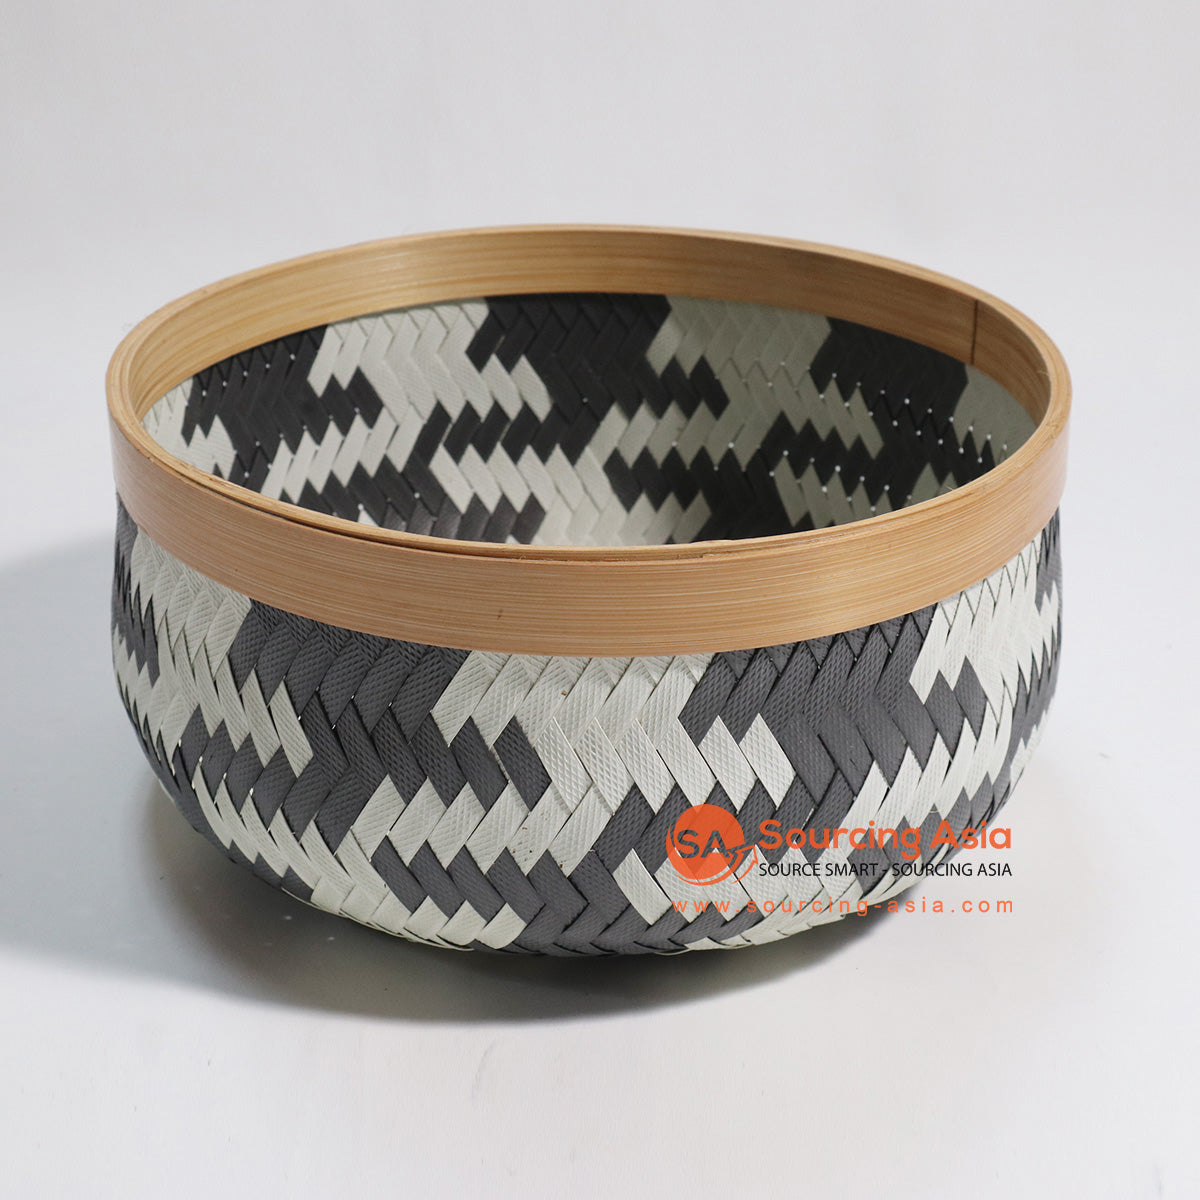 HBSC027 BLACK AND WHITE SYNTHETIC RATTAN BOWL WITH NATURAL BAMBOO TRIM